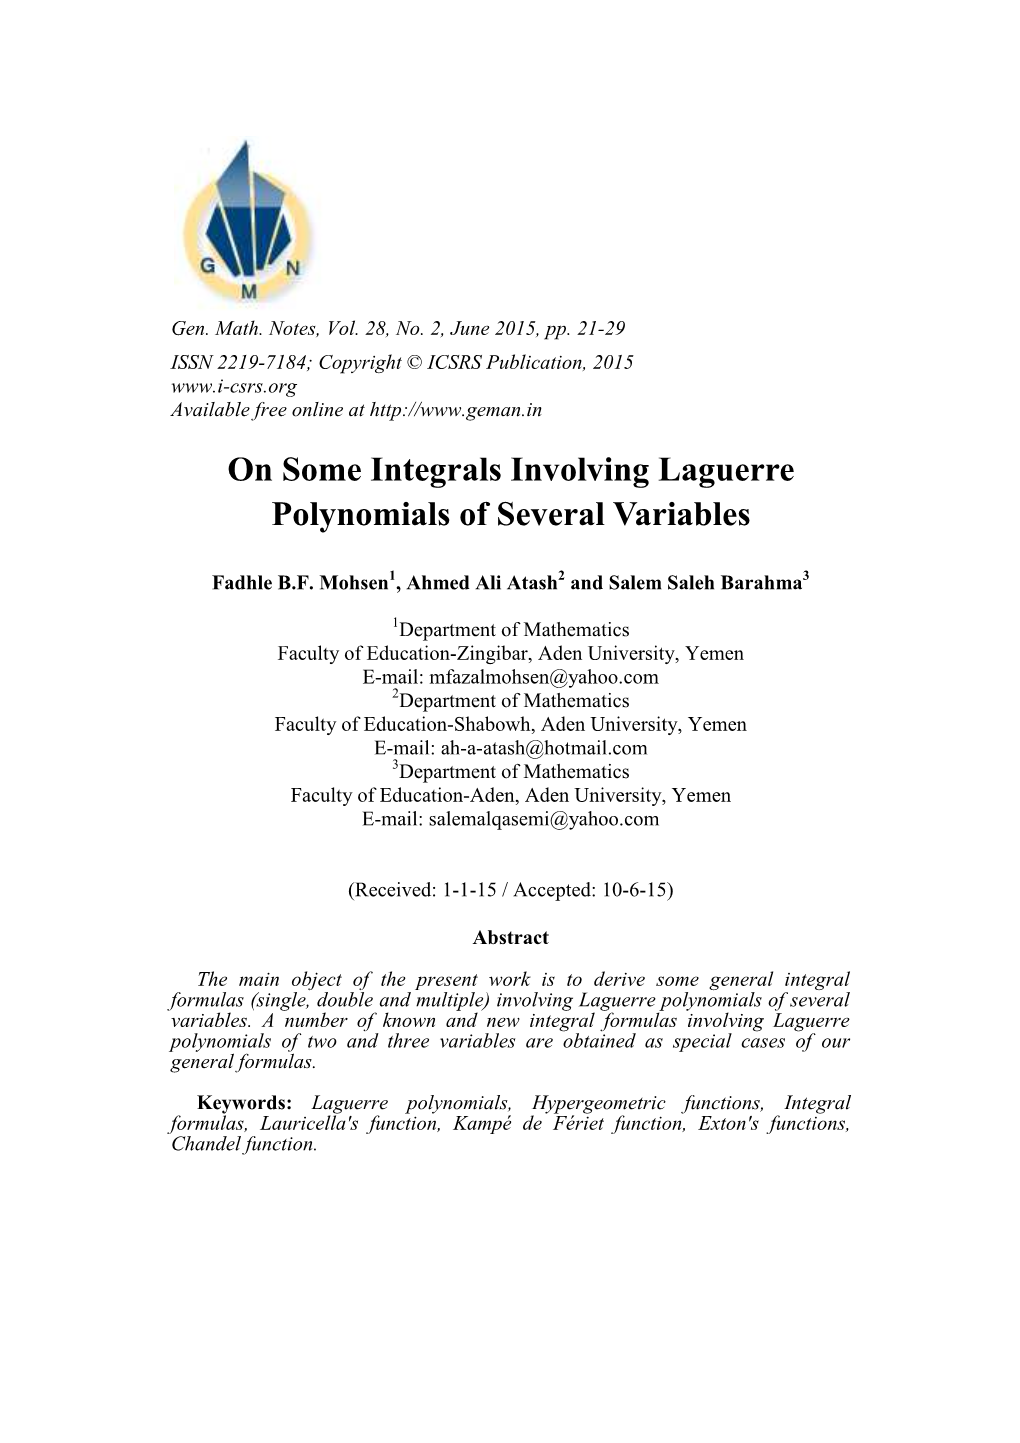 On Some Integrals Involving Laguerre Polynomials of Several Variables